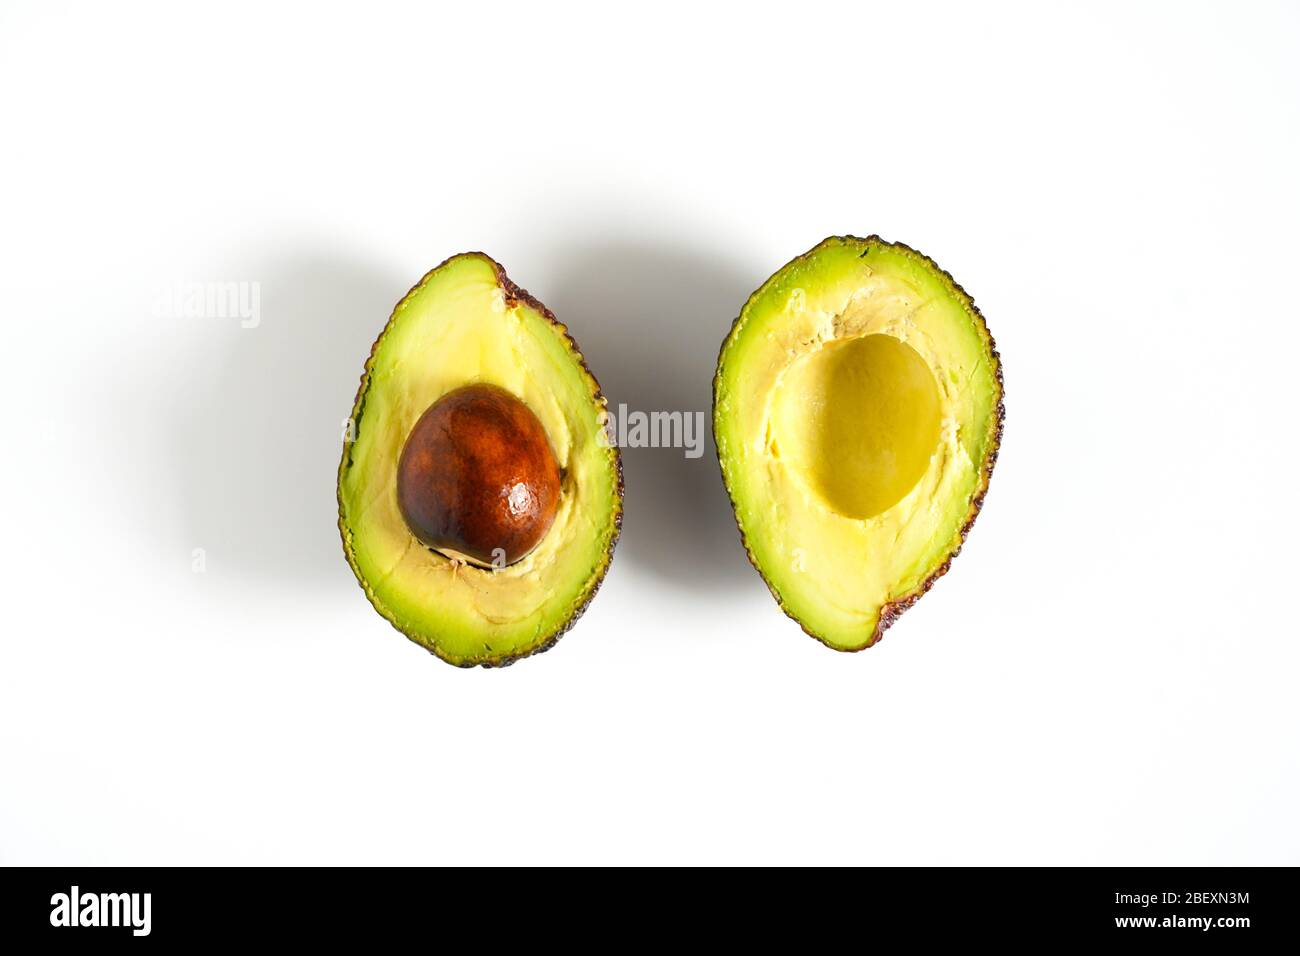 An avocado sliced in half to reveal the core against a plain white background Stock Photo